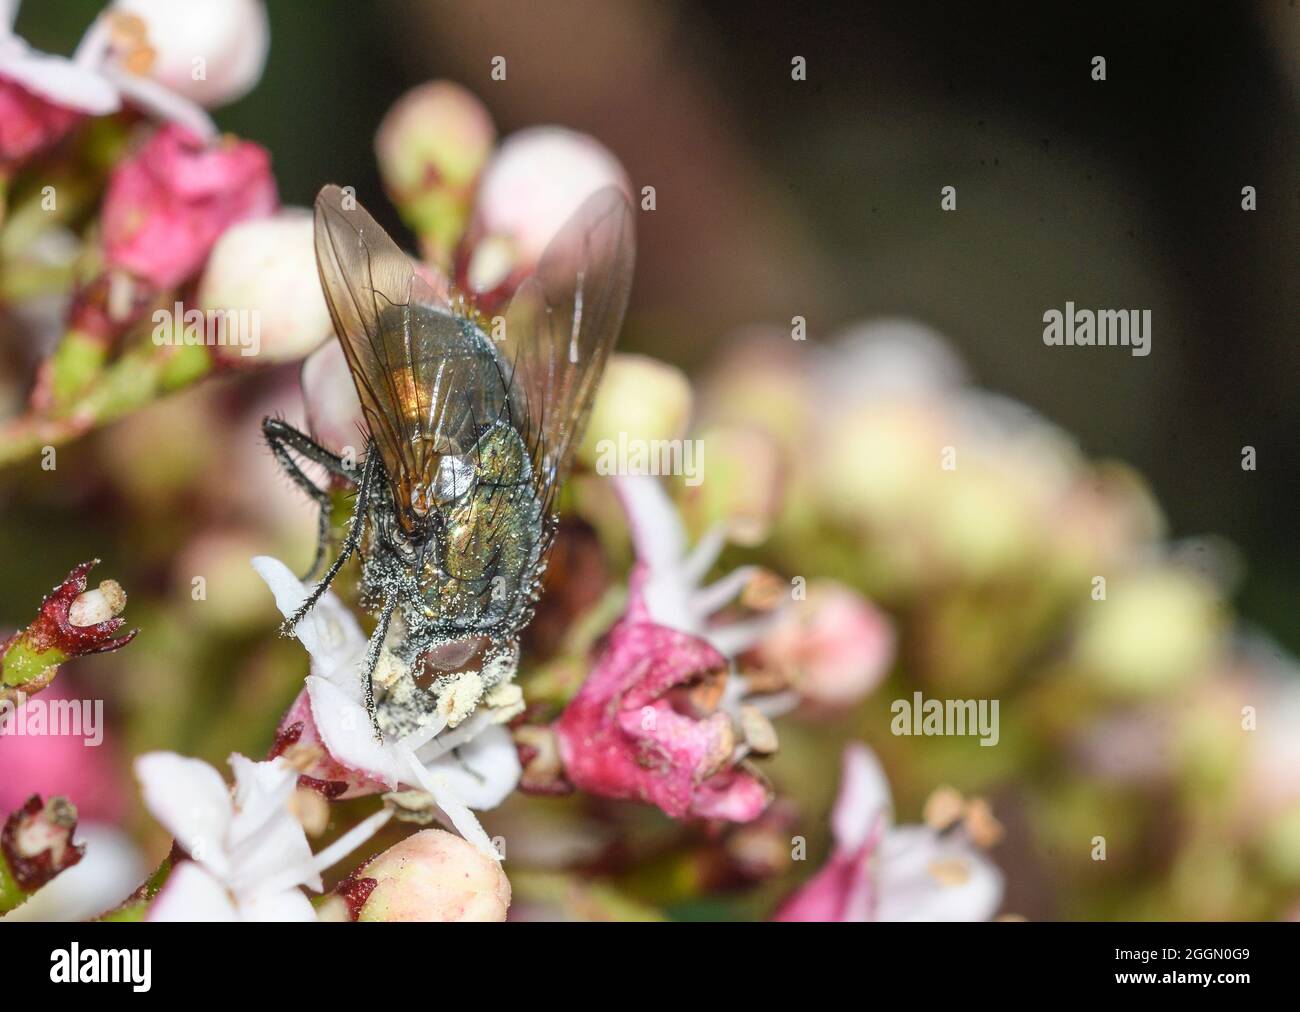 Fly feeding on viburnum tinus flowers, with pollen grains on its body Stock Photo